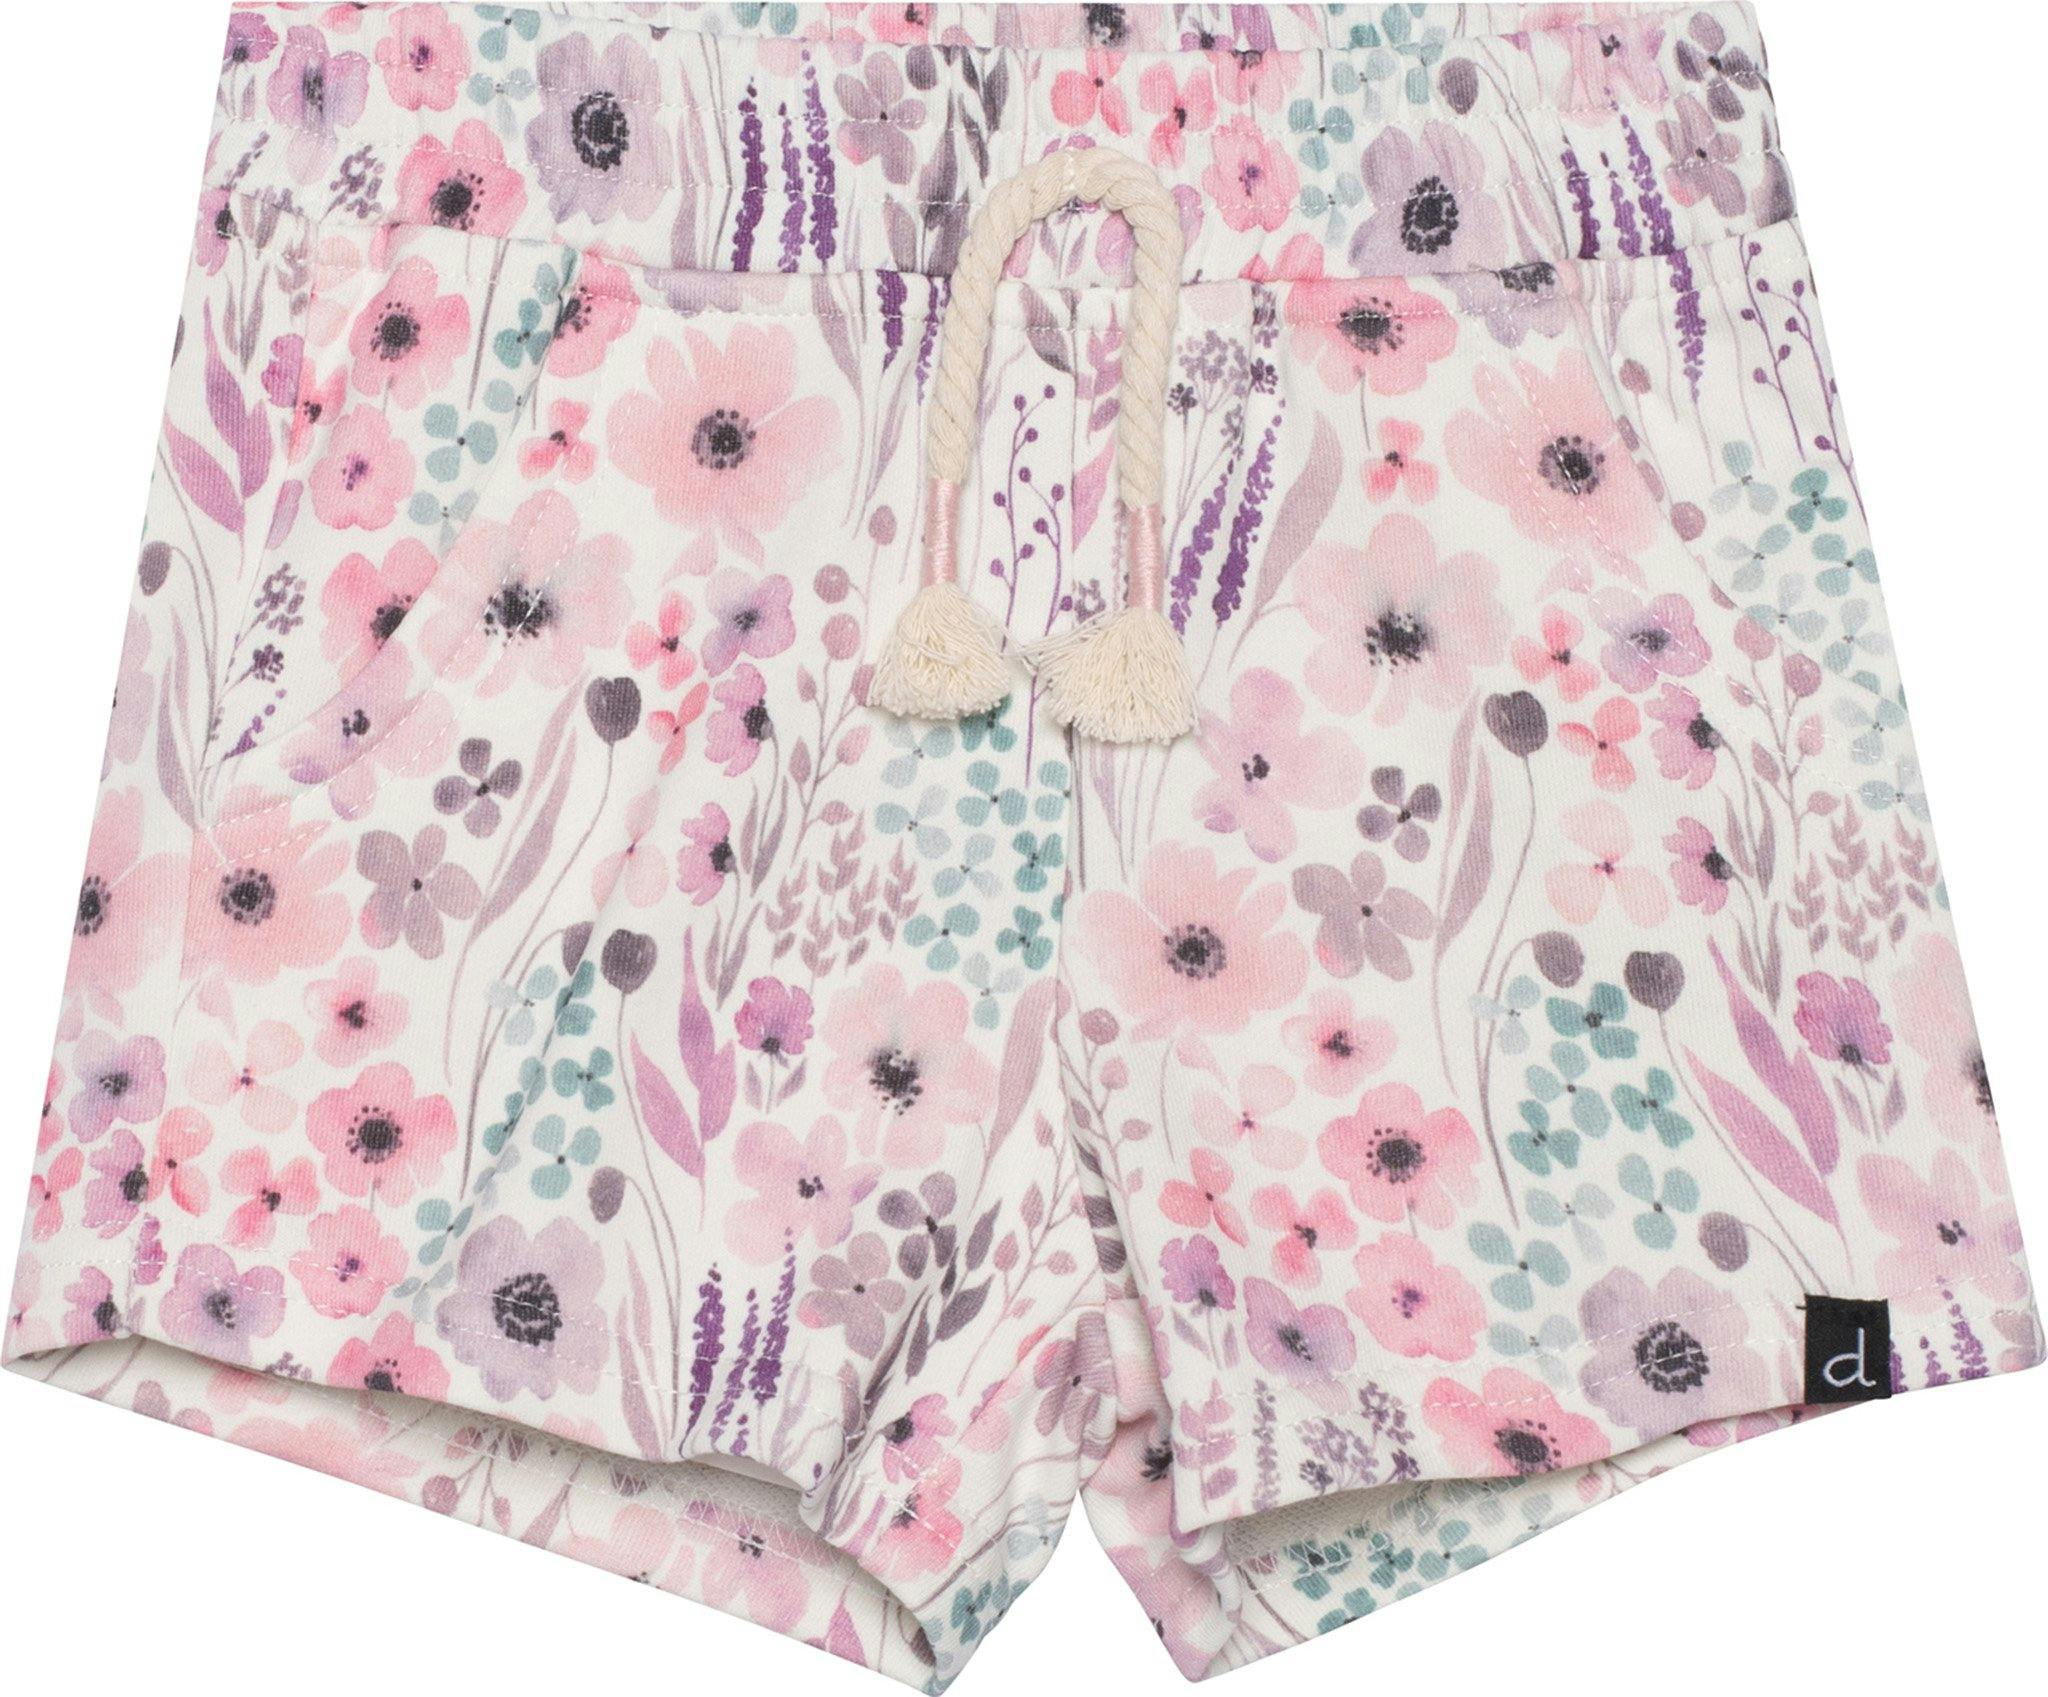 Product image for Printed Watercolor Flowers Shorts with Pocket - Little Girls